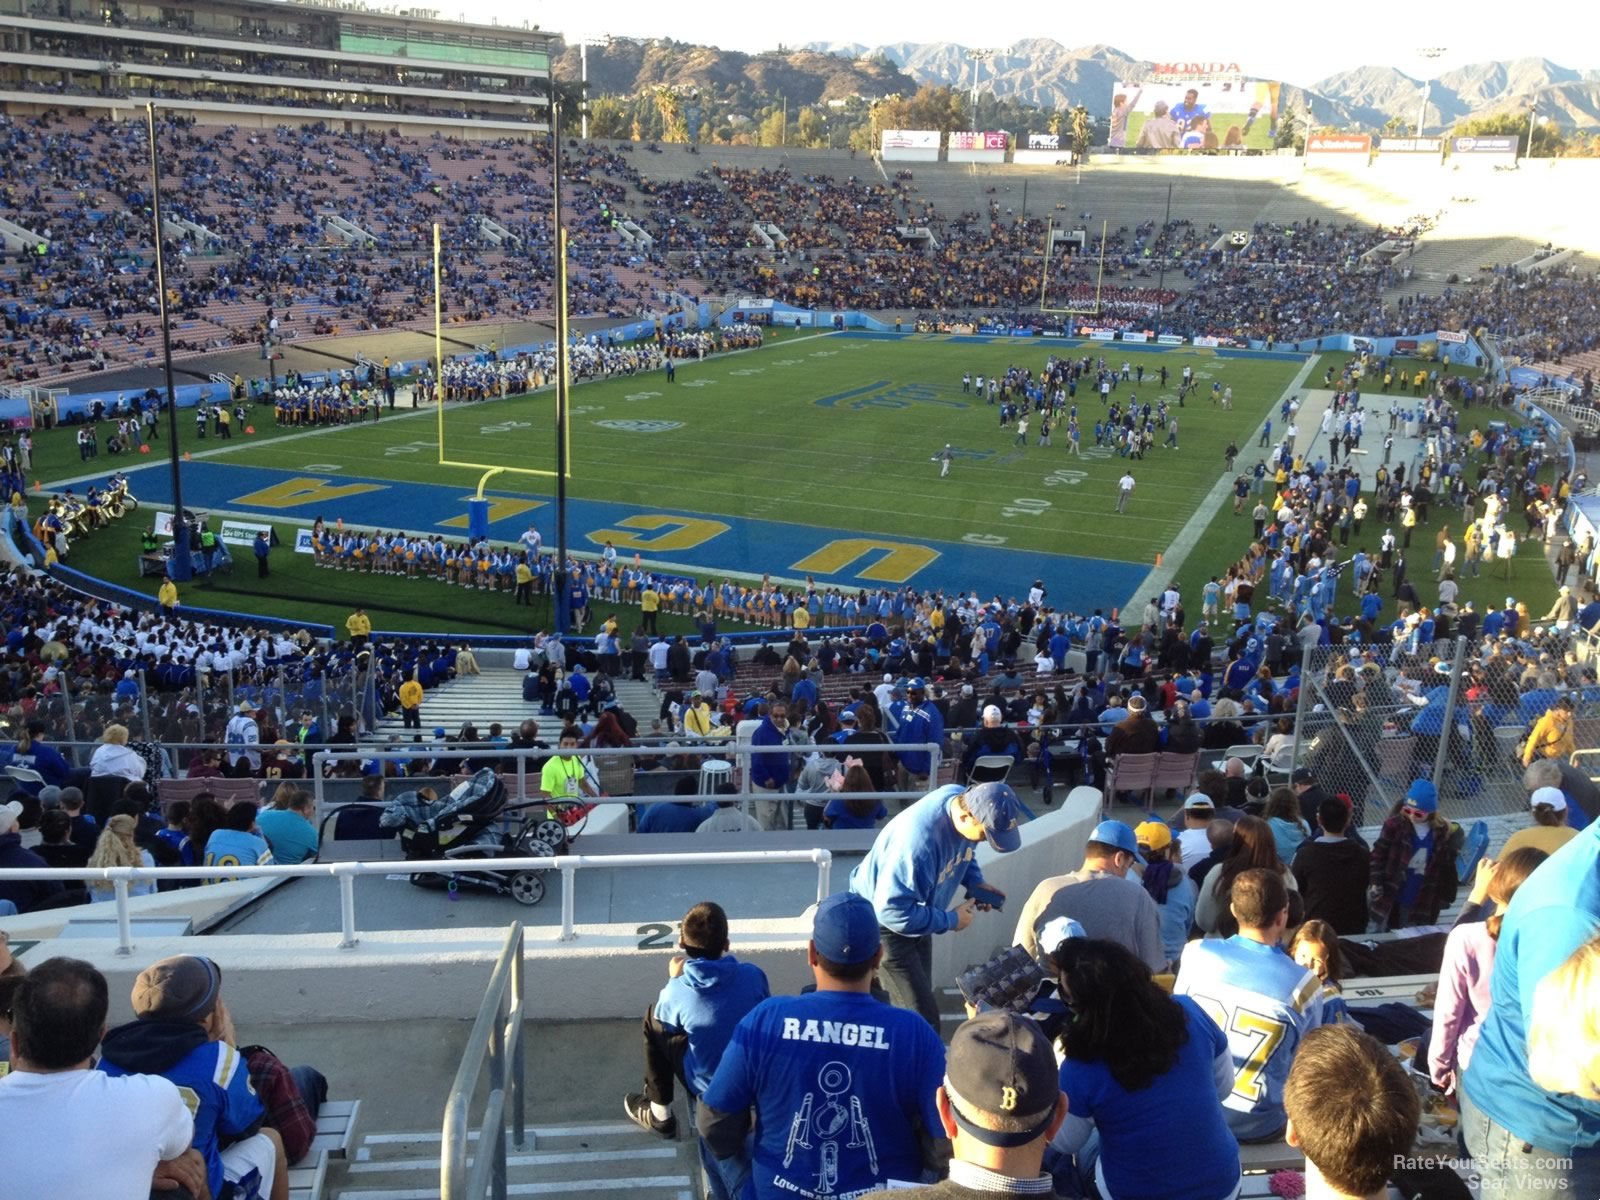 section 27, row 51 seat view  for football - rose bowl stadium